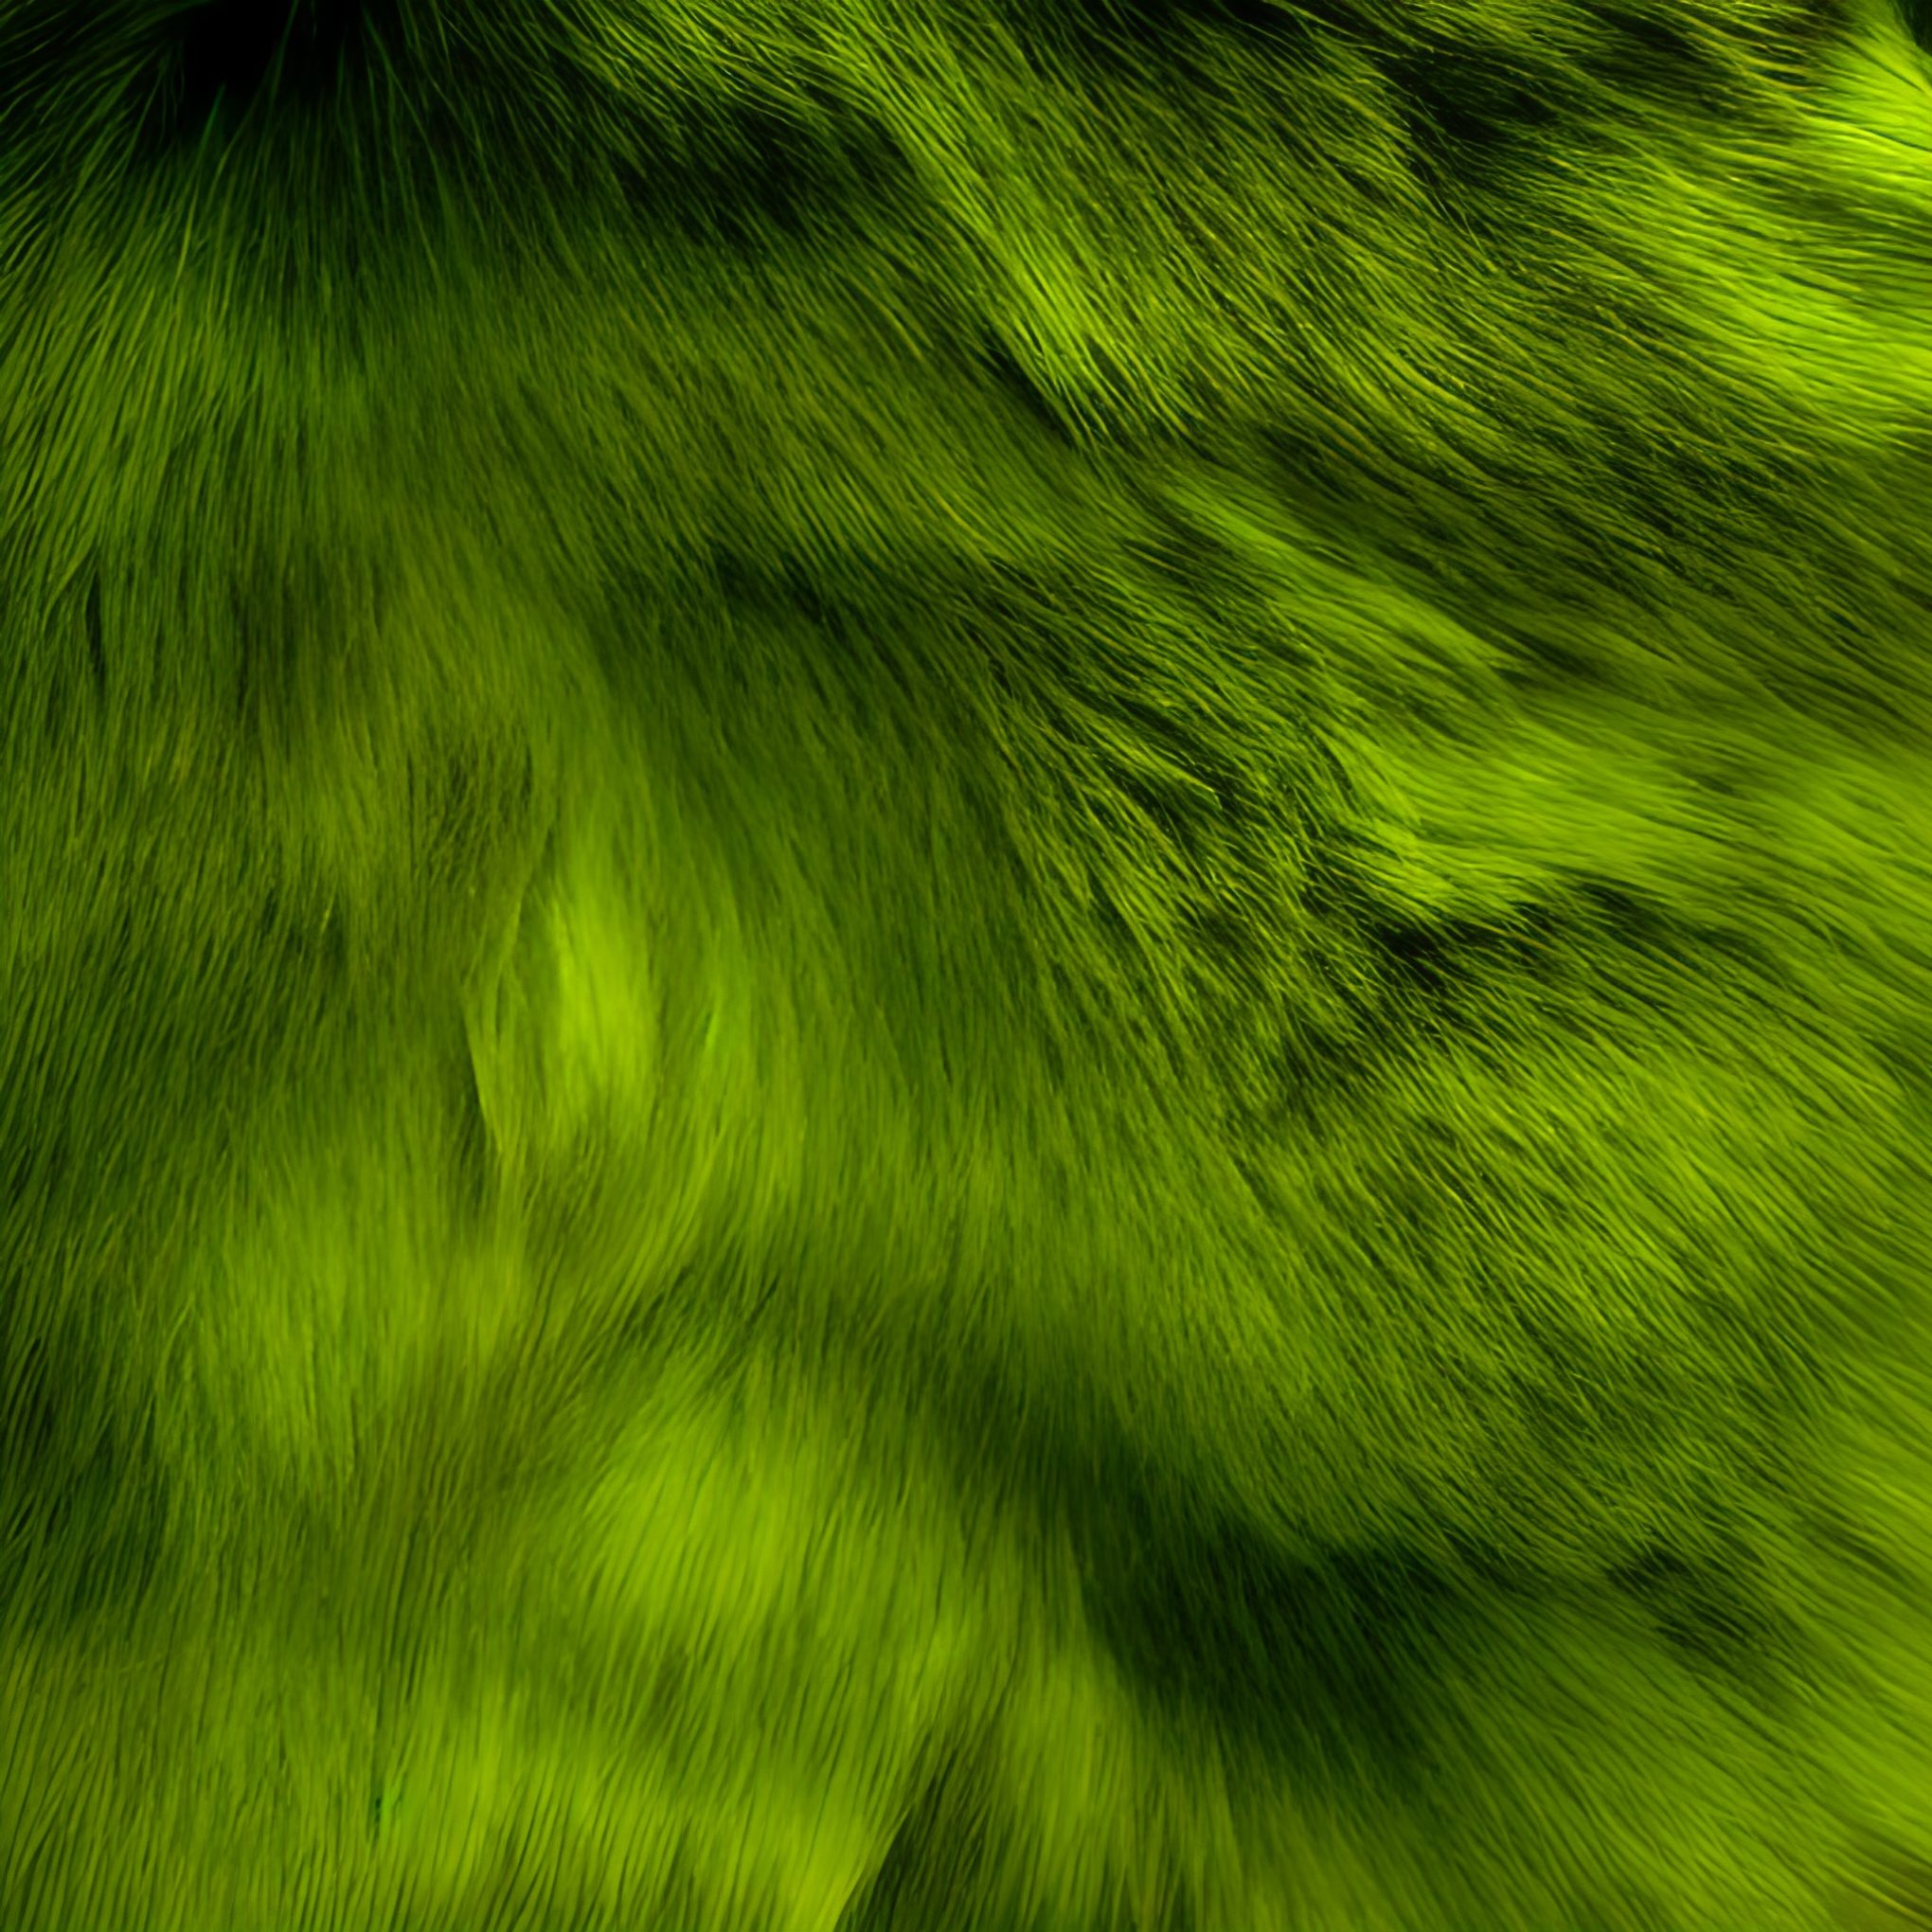 Bright Lime Green Fluffy Fur Background Free Stock Image